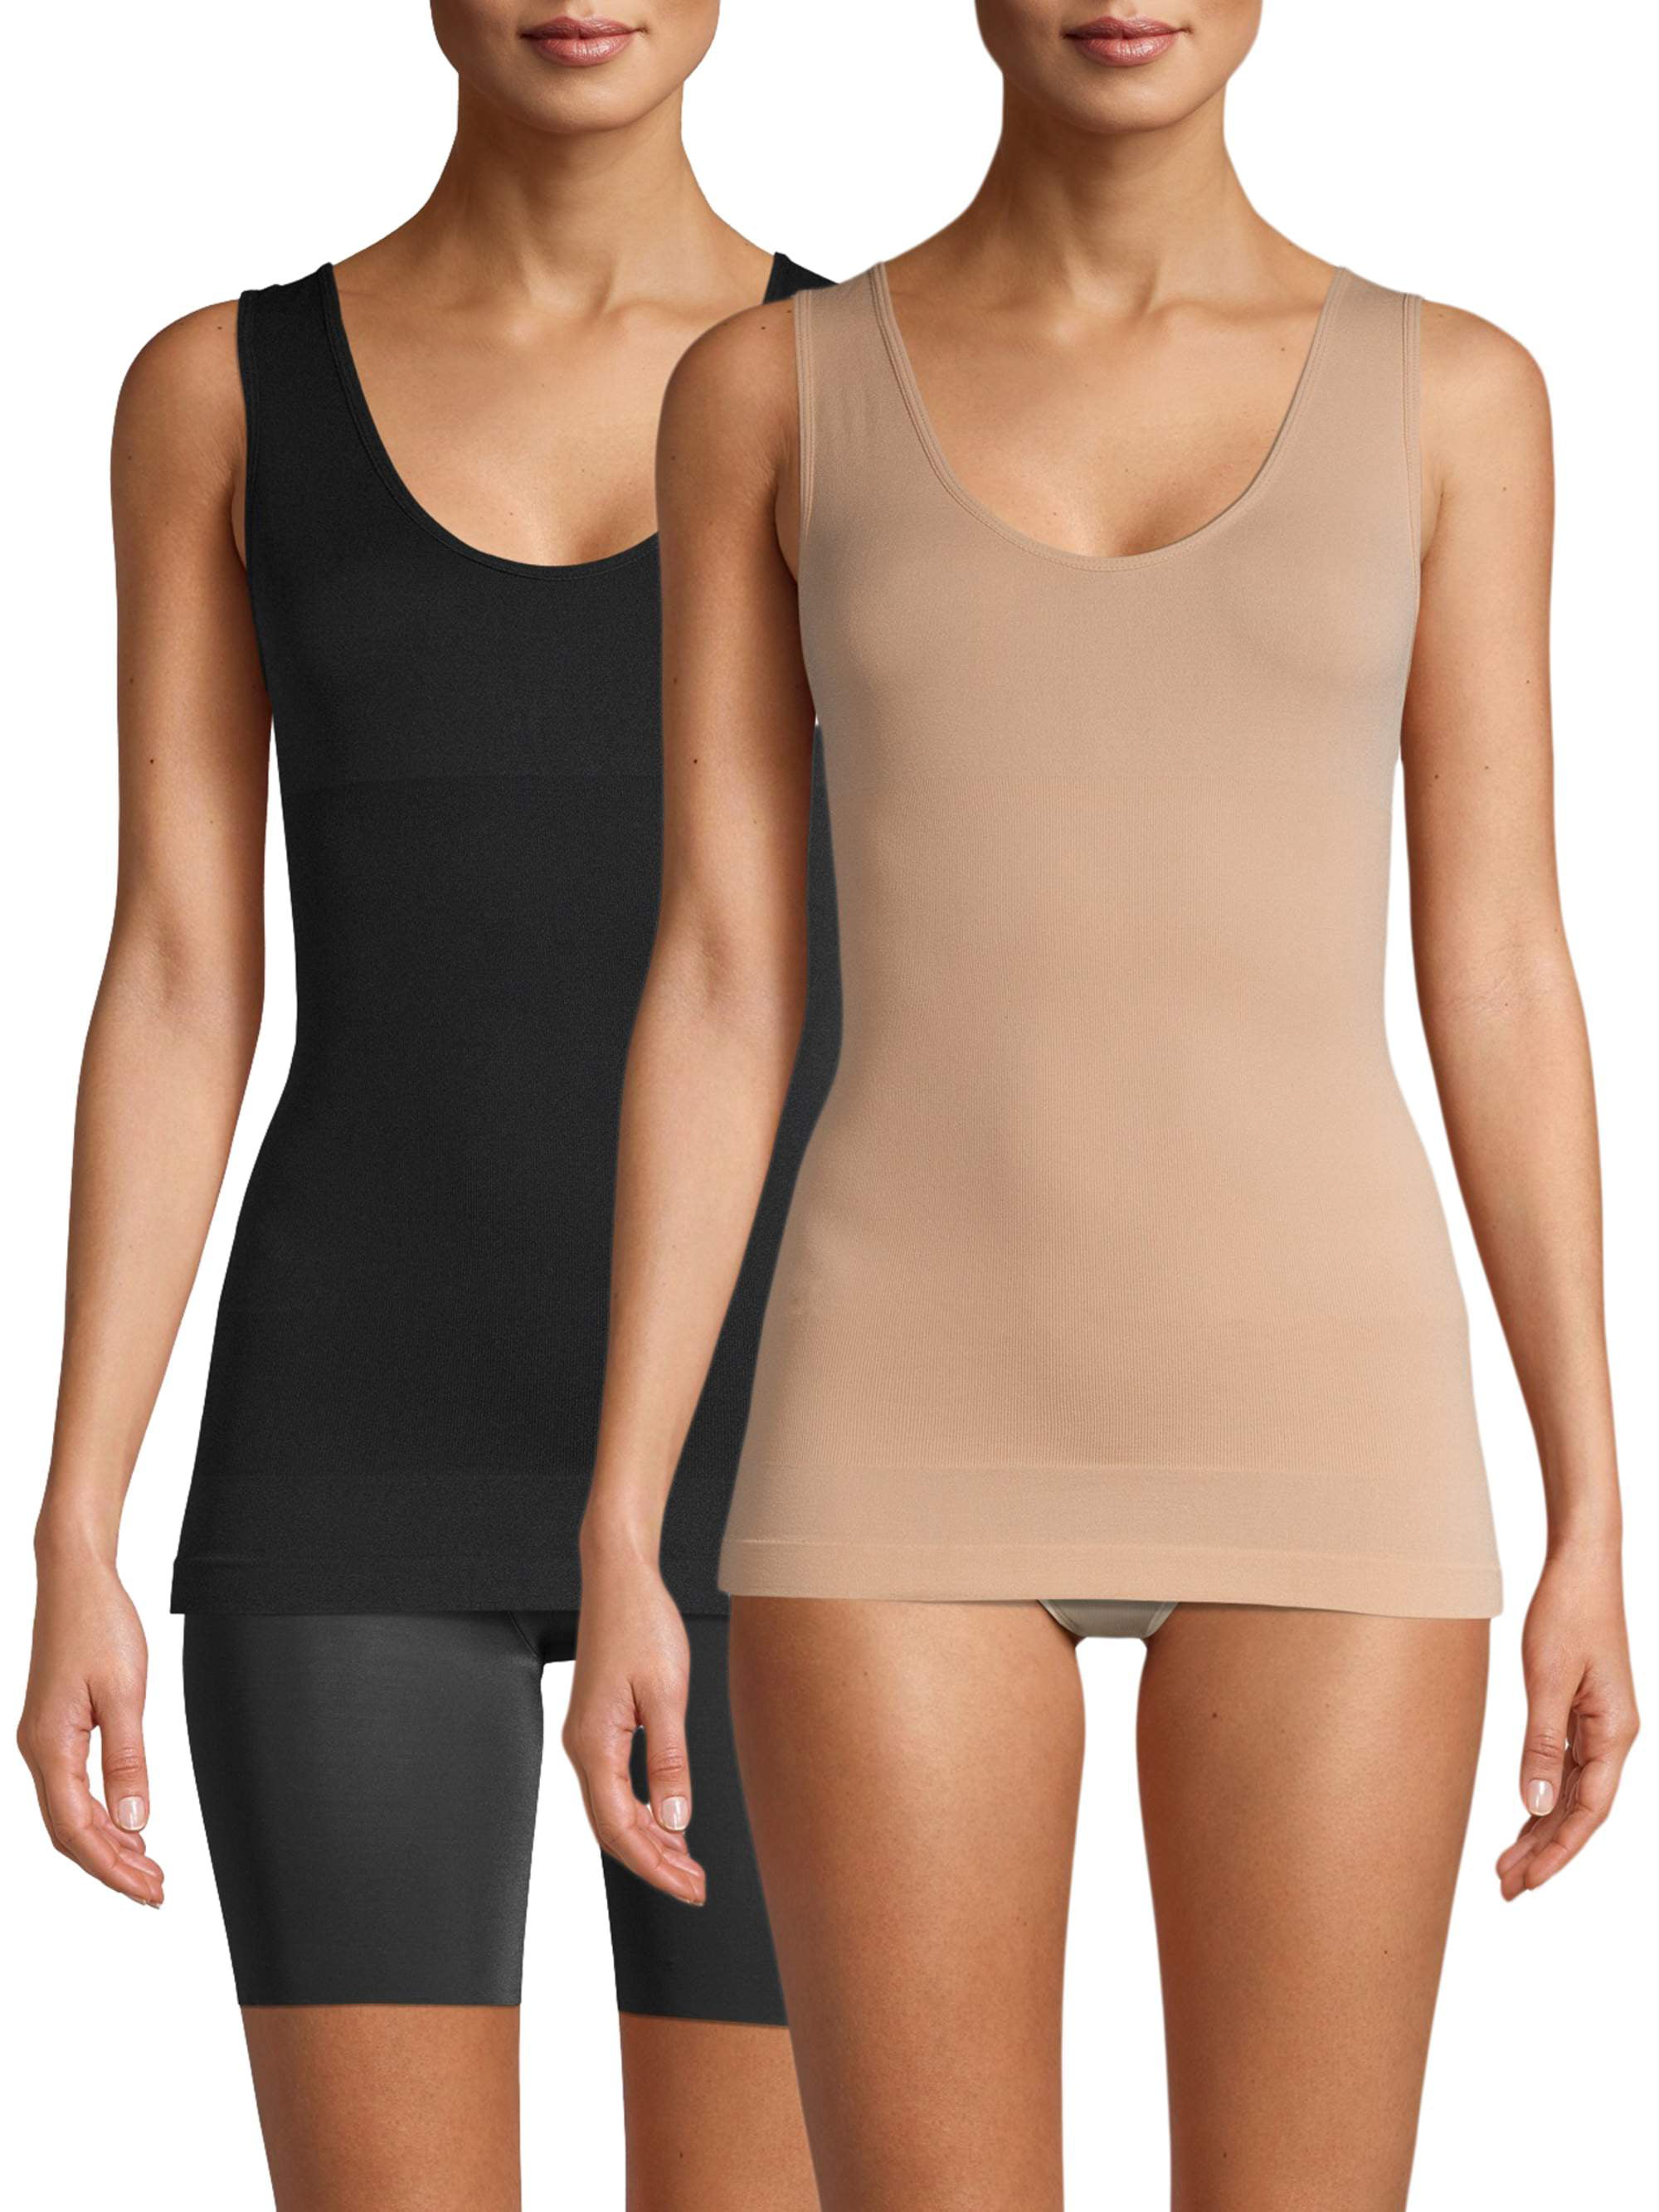 Buy Get In Shape Women's Body Shaping Camisole - Pack of 2 Online